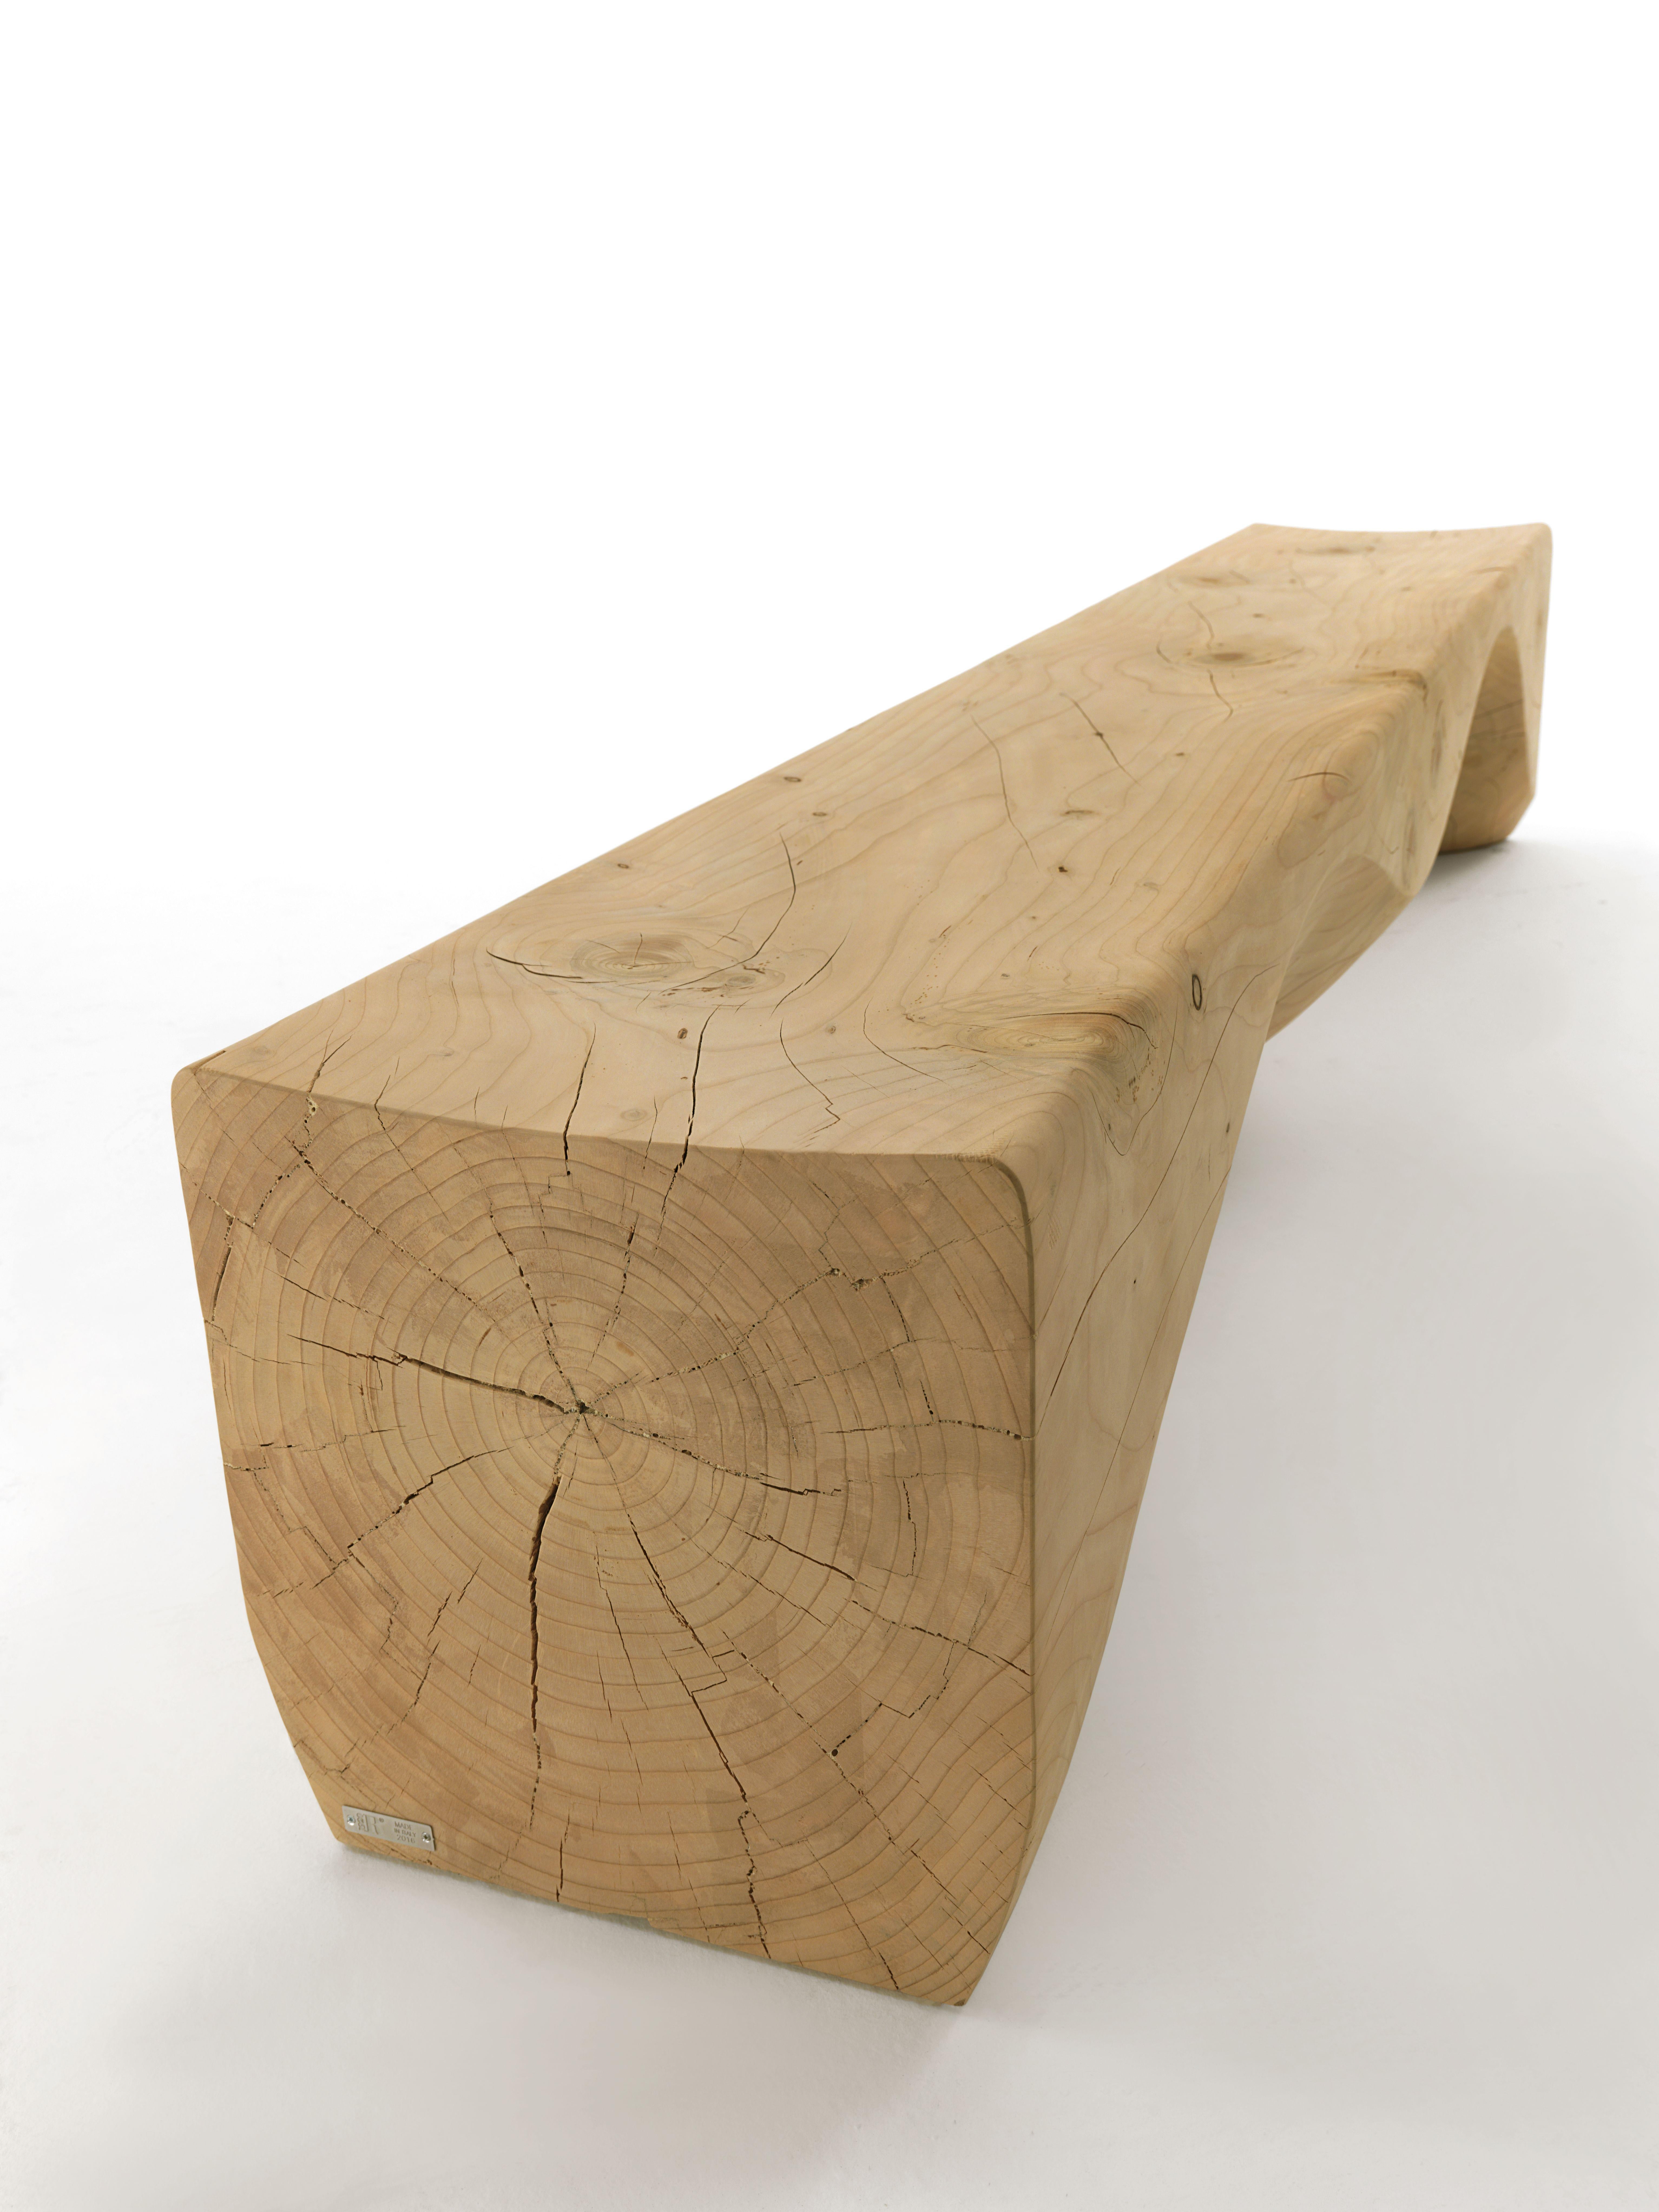 Moderne Banc AM Contemporary Hsiao-Ching Wang Cèdre Naturel Made in Italy Riva19 en vente